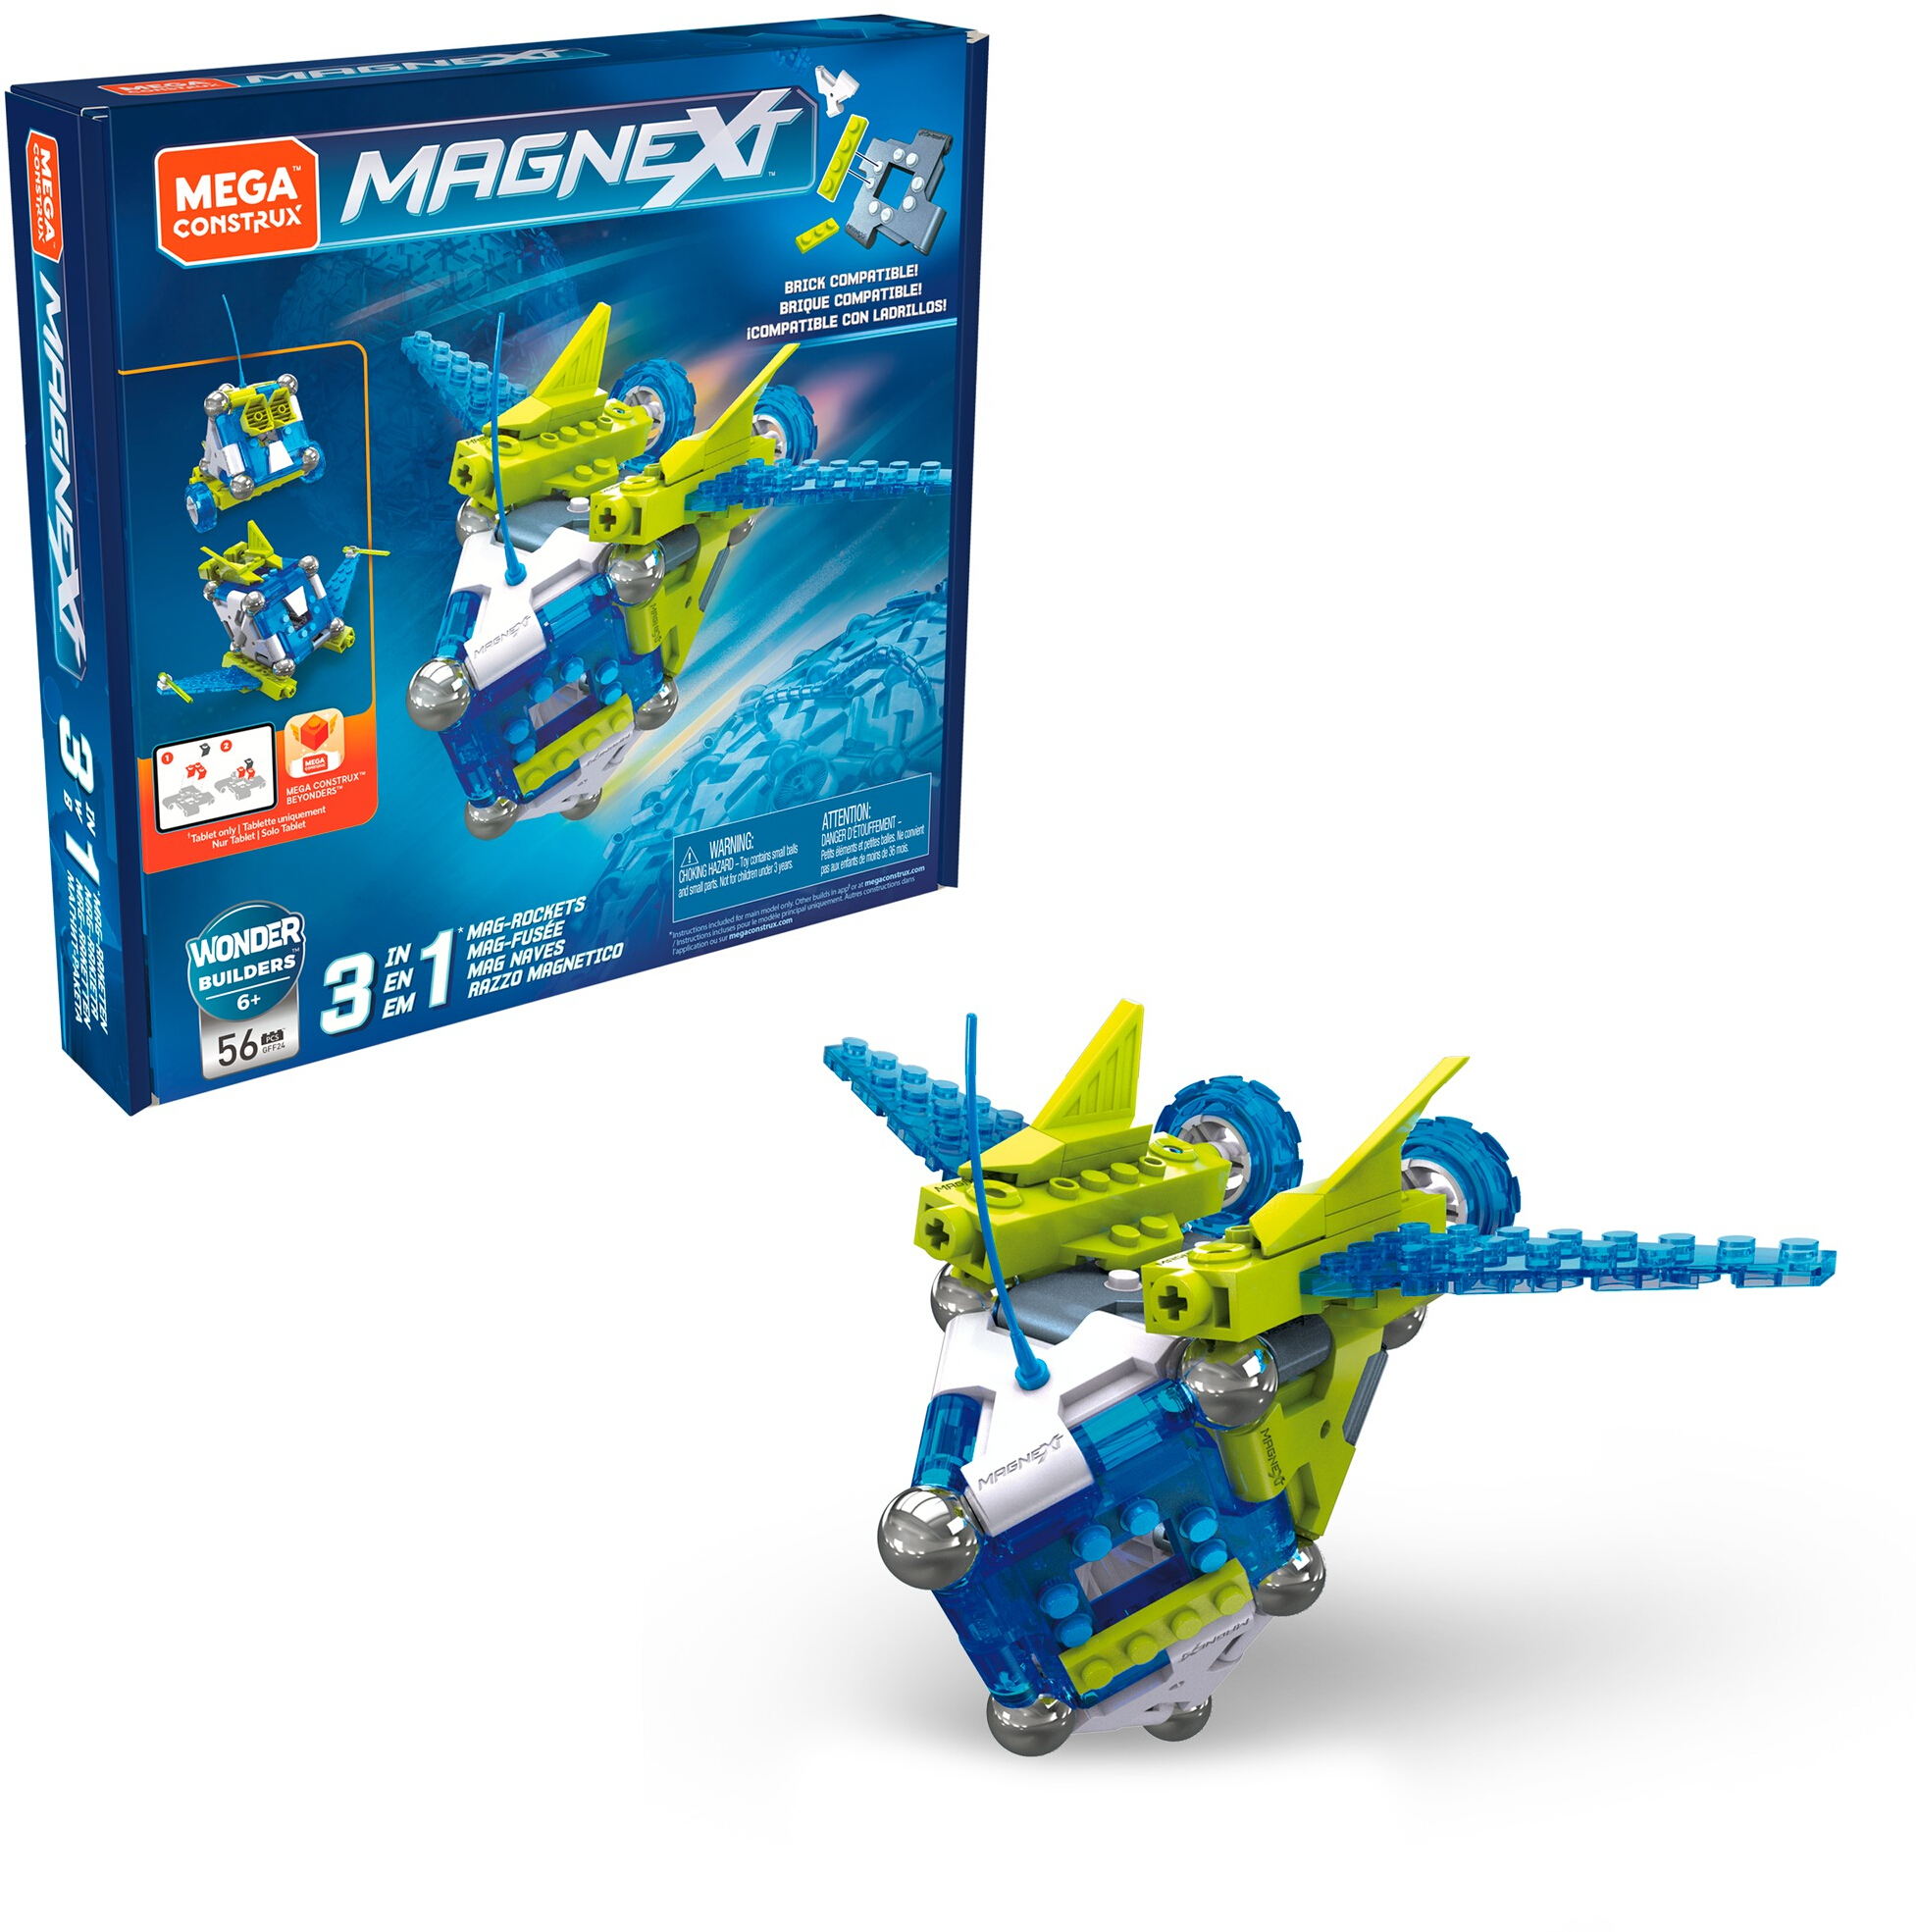 Mega Construx Magnext 3-In-1 Mag-Rockets Buildable Toy for Kids 6 Years and Up - image 1 of 6